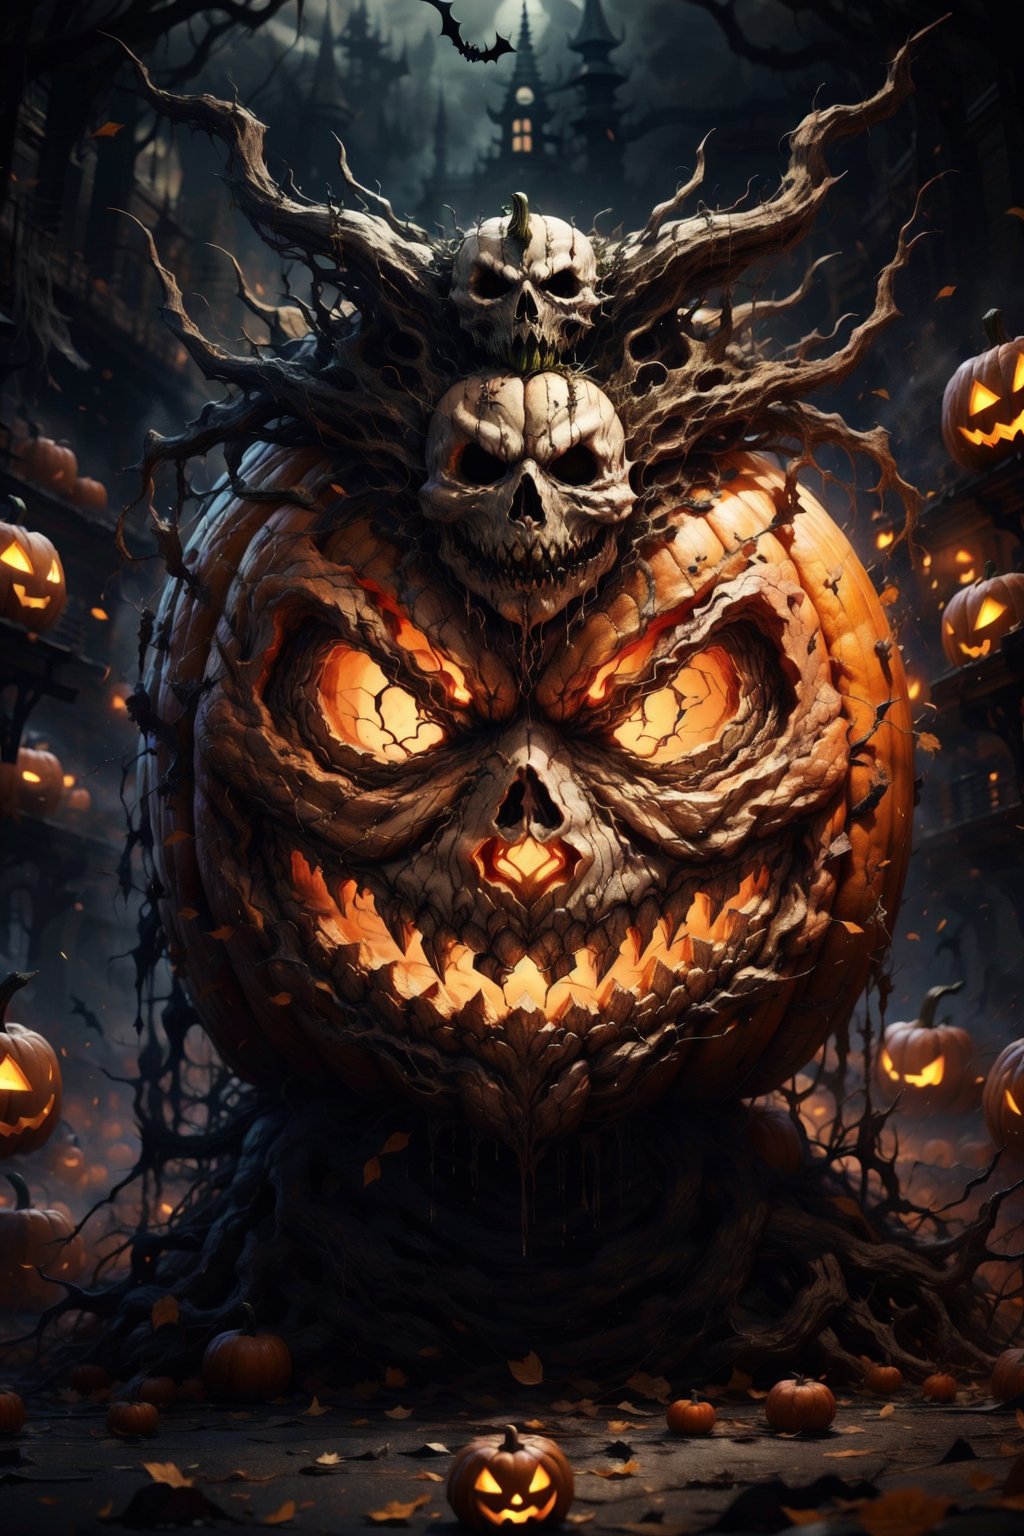 ghost, Halloween 
style, Halloween party, Halloween time,  art design illustration face,EpicArt,fantasy00d,DonMG414 ,horror, more details, more details, more beautiful, more beautiful ,Jack o 'Lantern,ff14bg